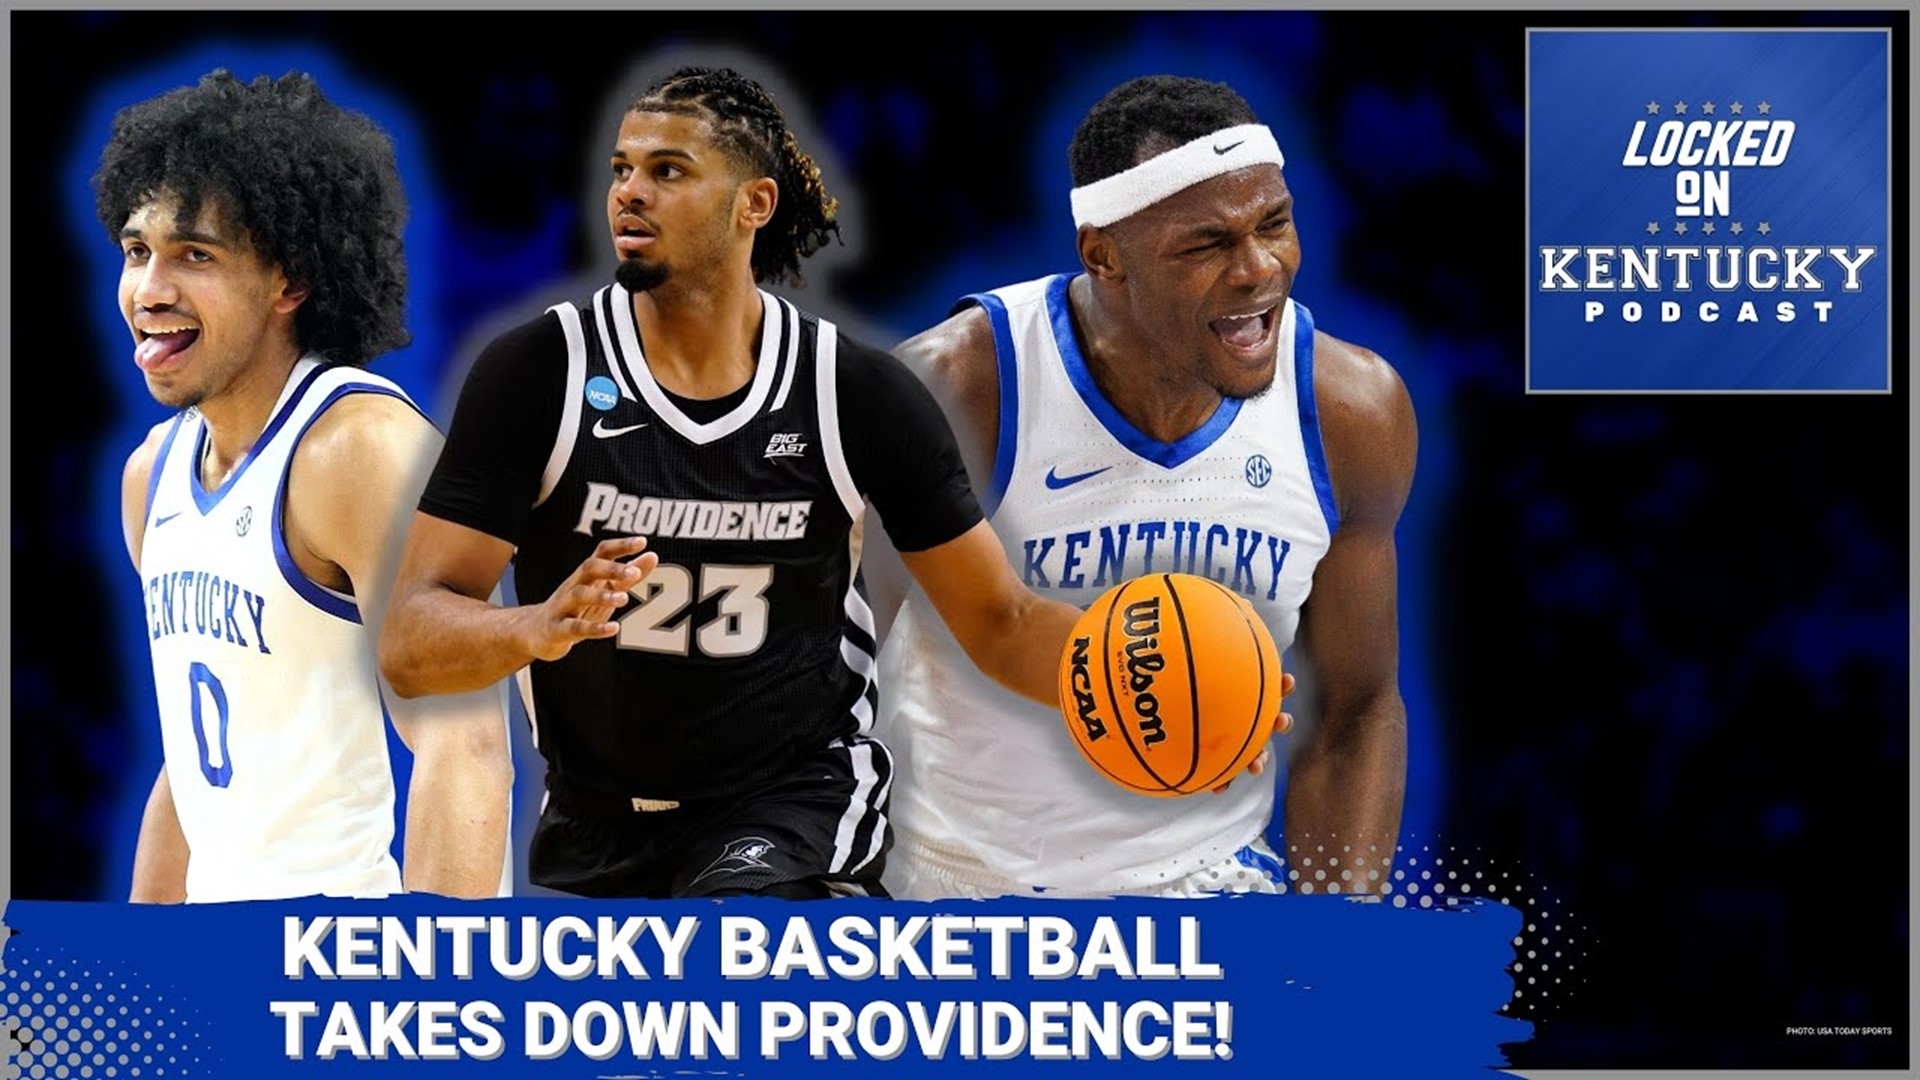 The Kentucky Wildcats needed that win over Providence.